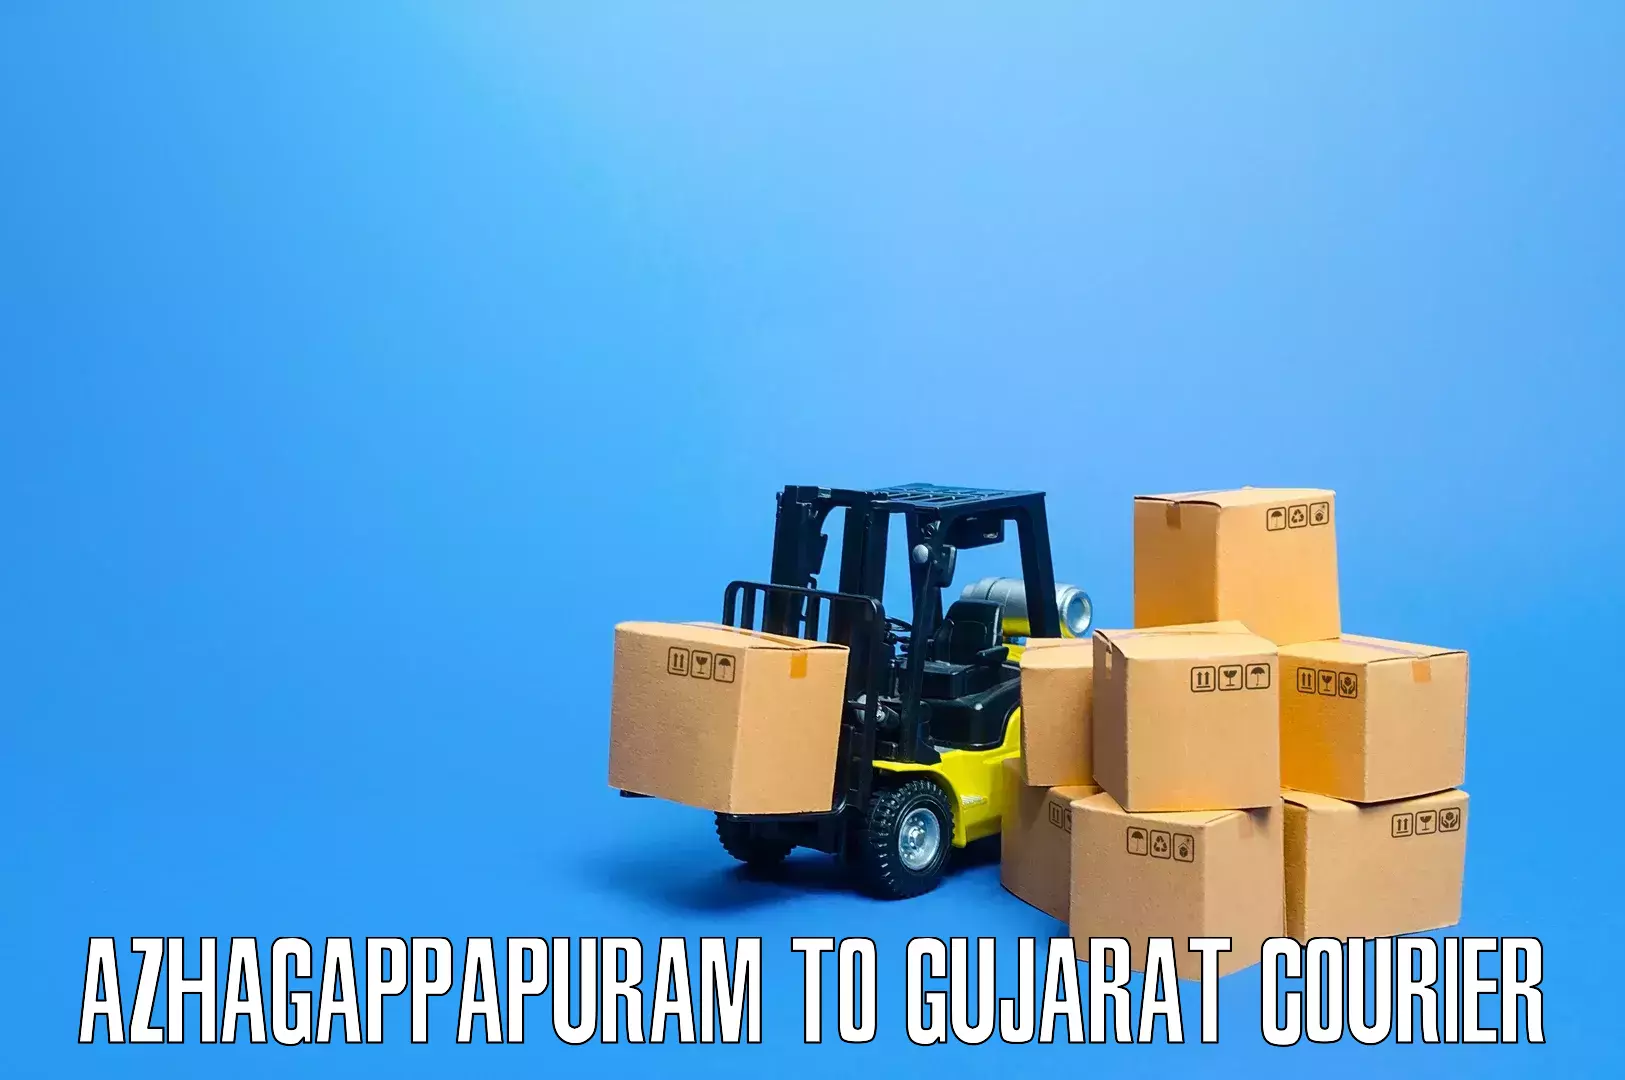 Professional movers and packers in Azhagappapuram to Gujarat